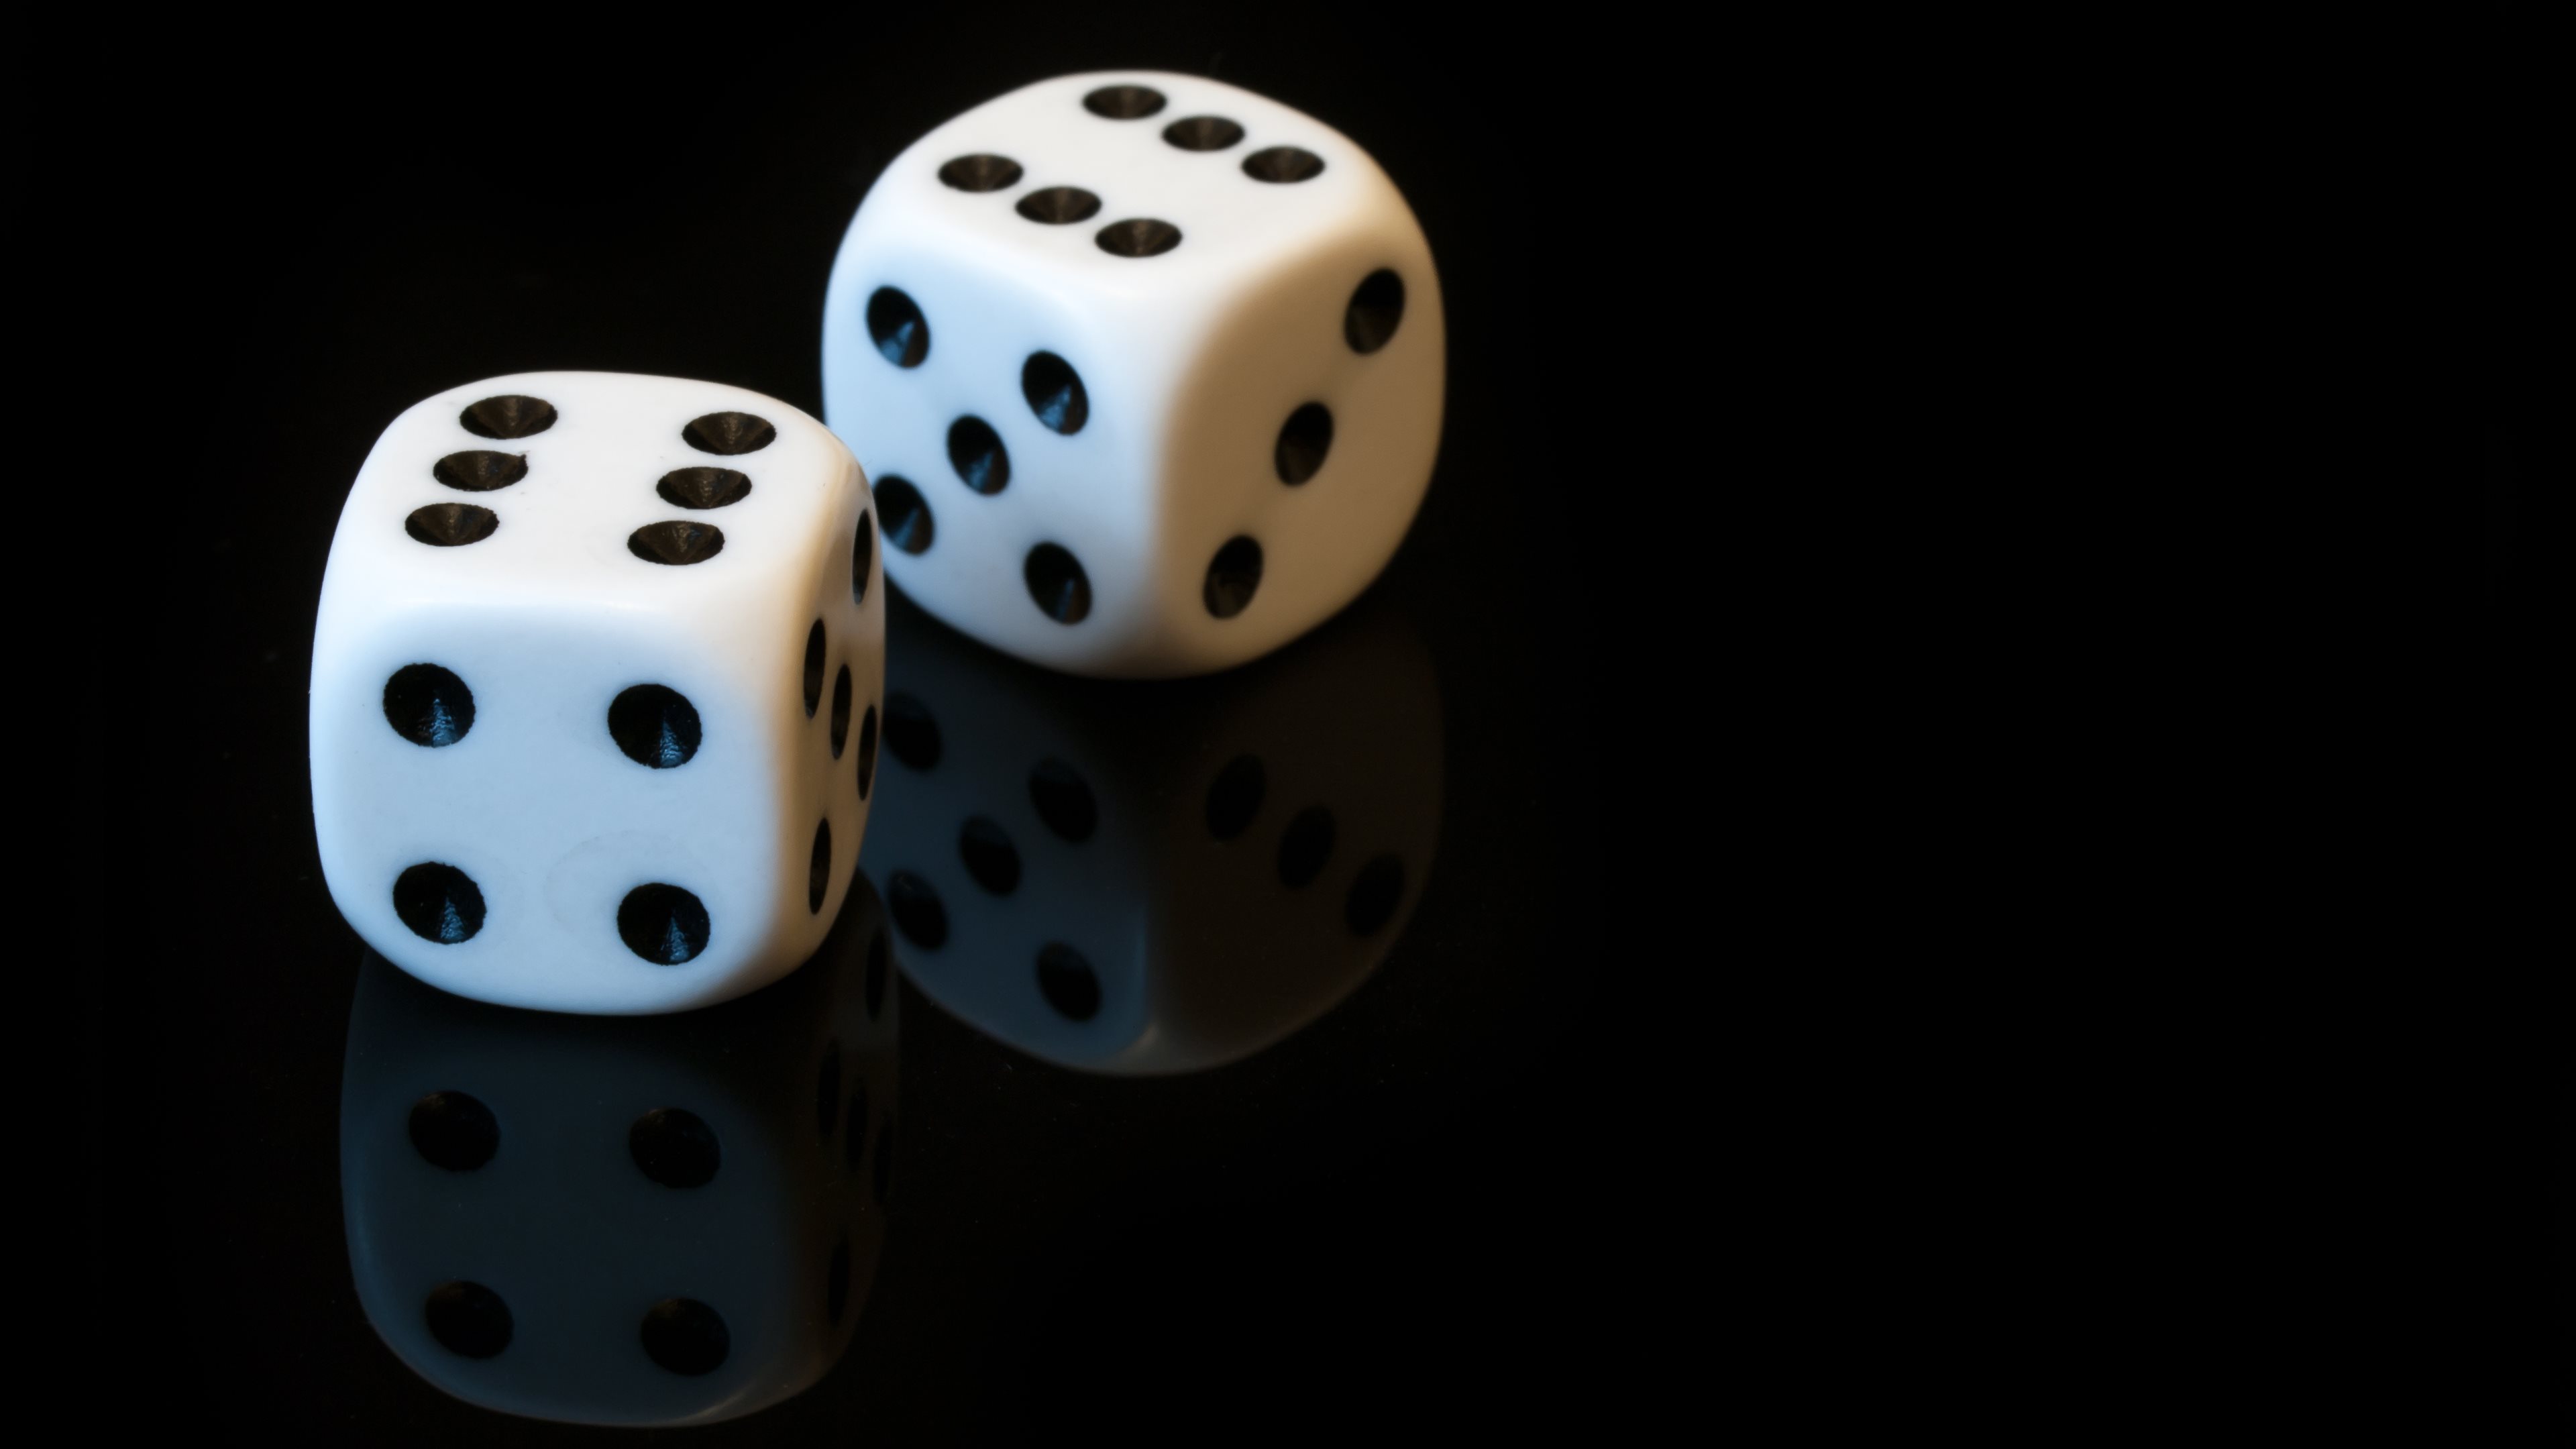 Two dice rolling 11, shot against a white background Stock Photo - Alamy